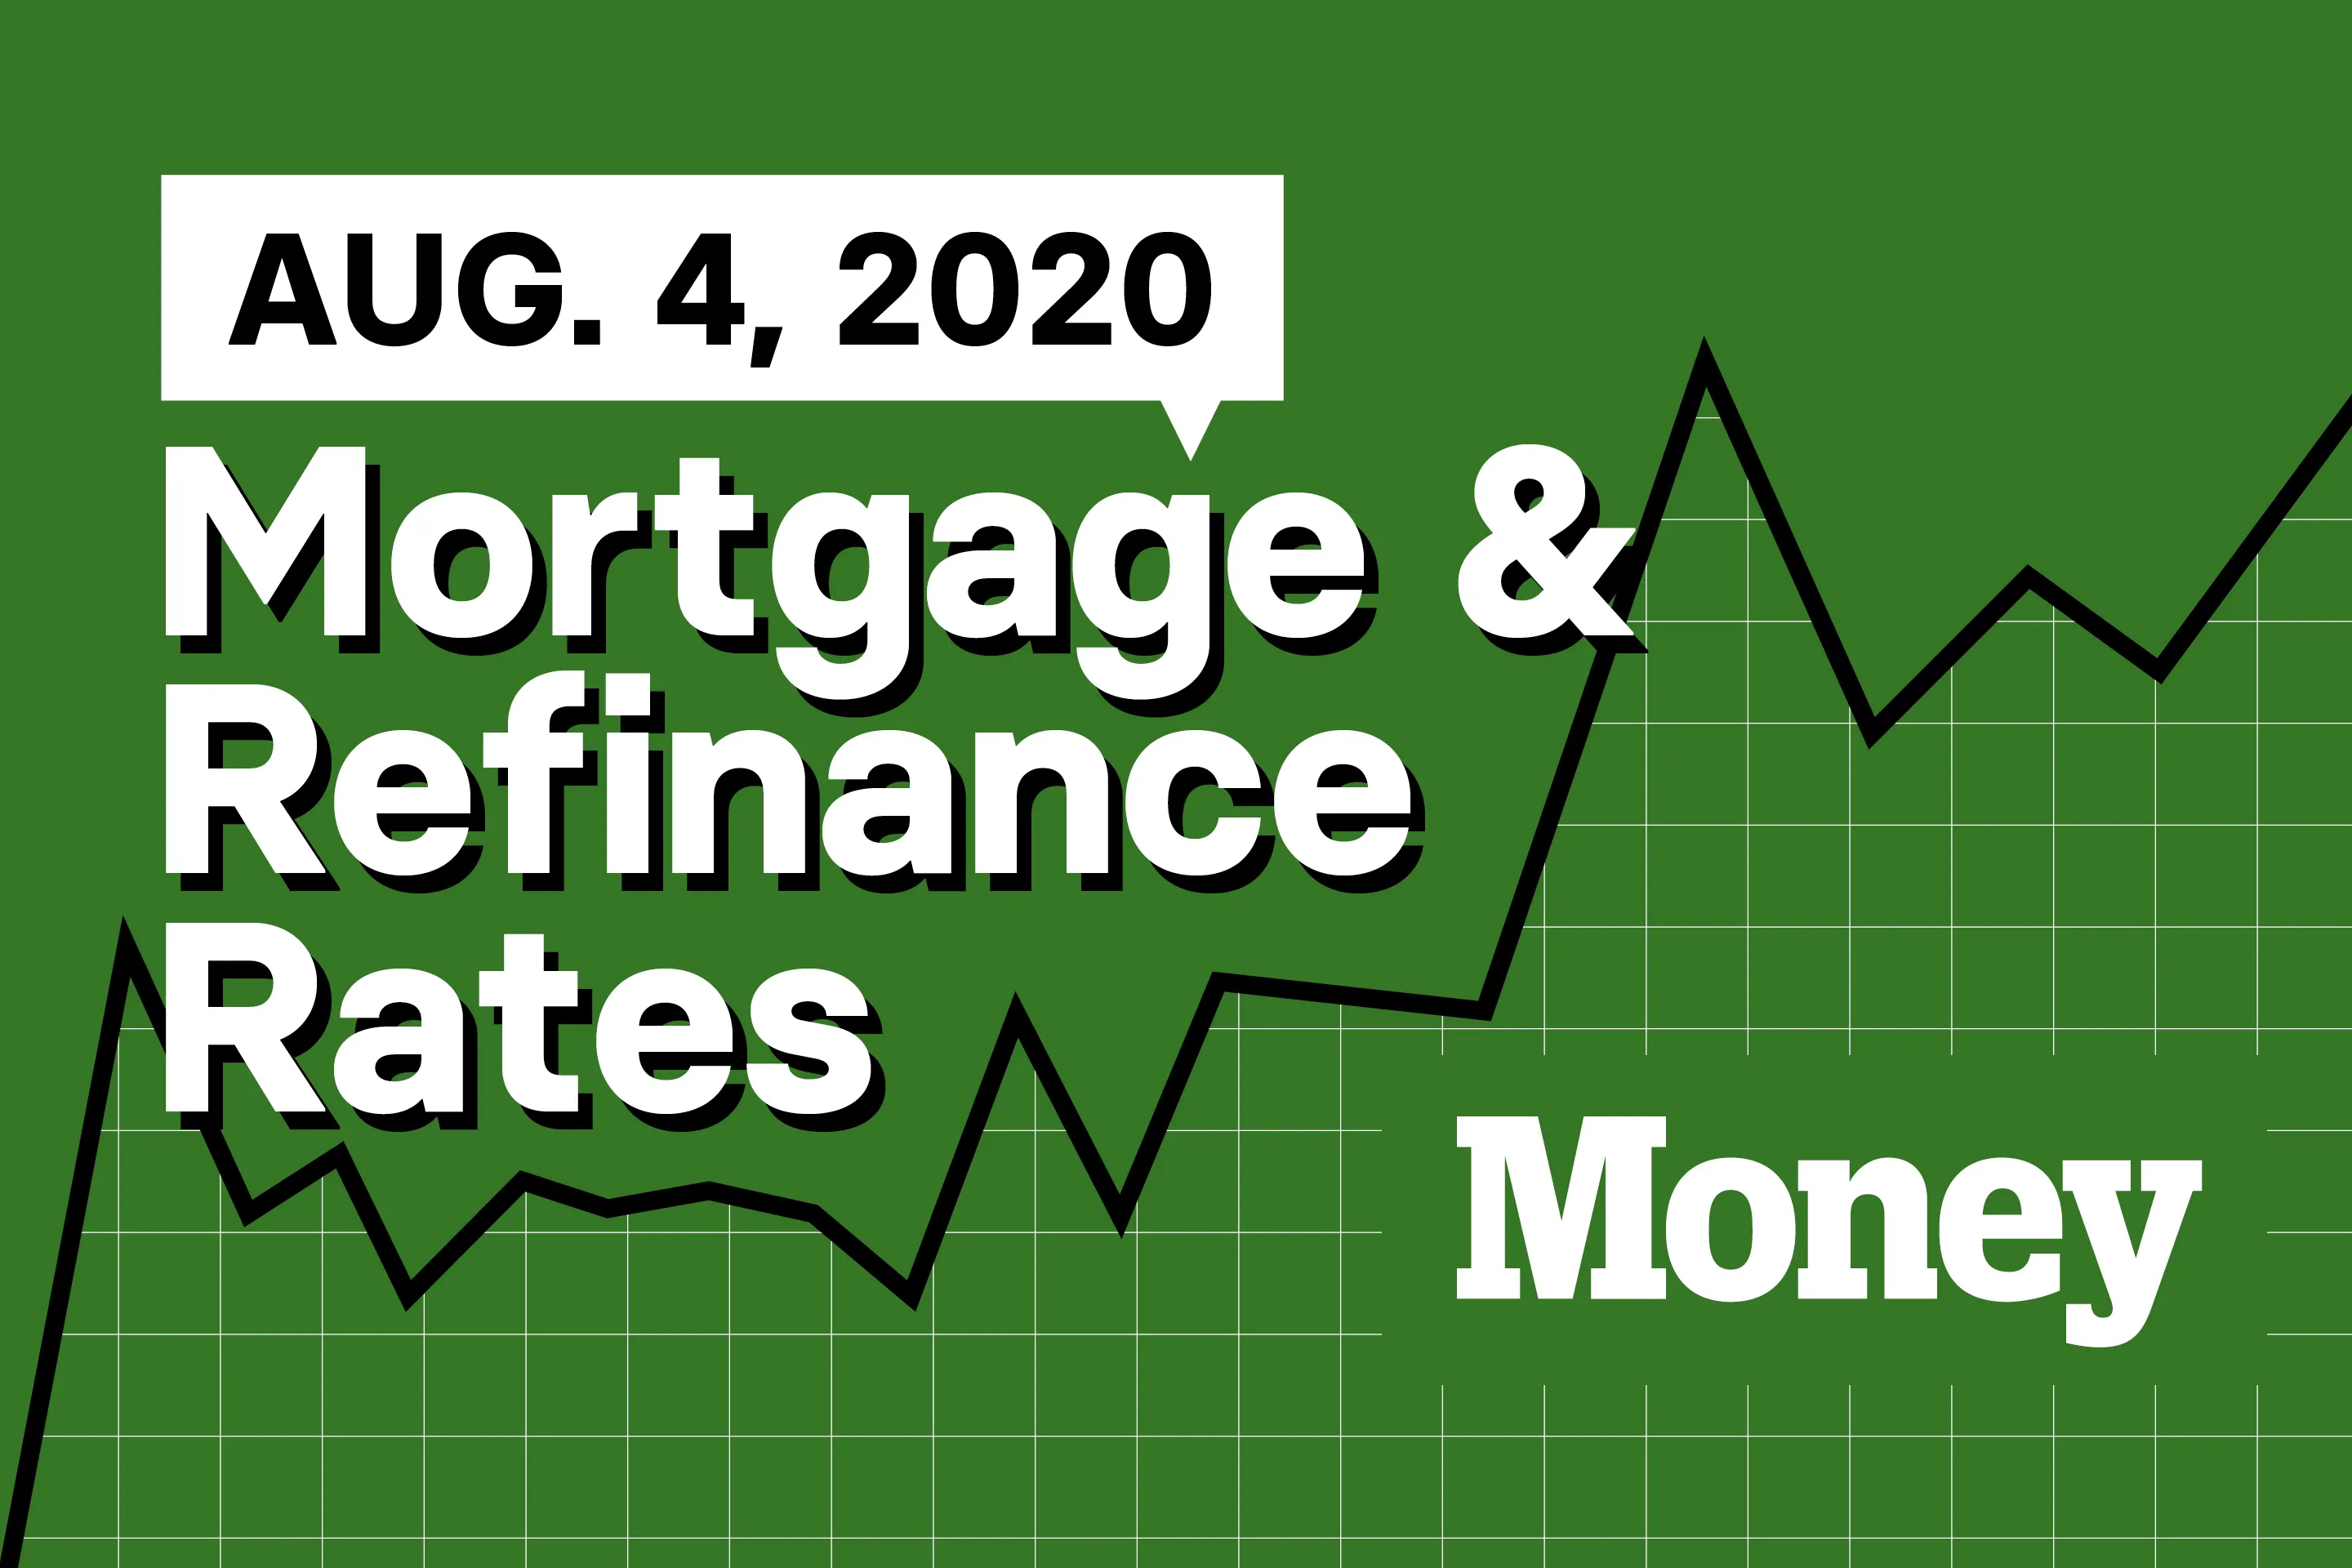 Here Are Today's Best Mortgage & Refinance Rates for August 4, 2020